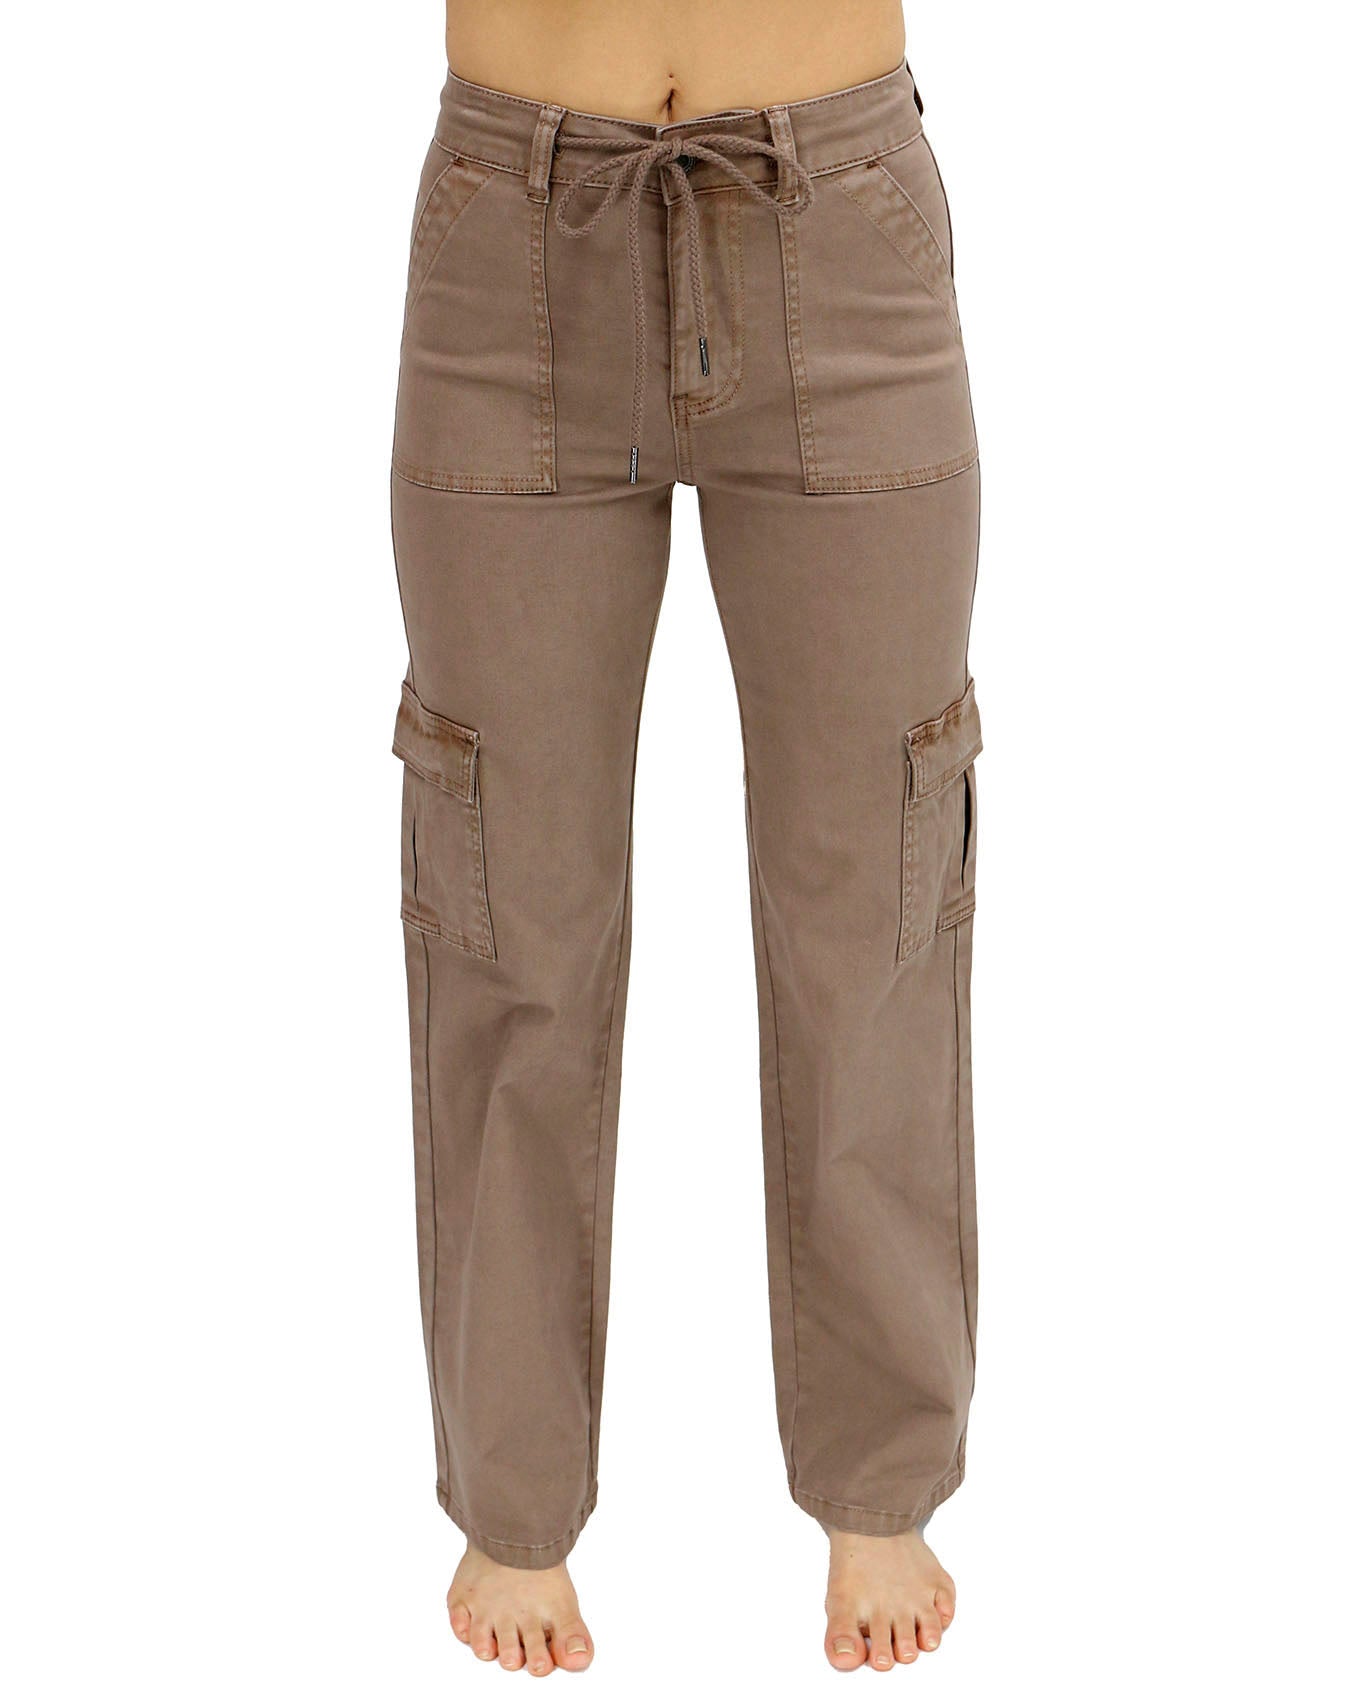 Sueded Twill Caribou Cargo Pants - Grace and Lace